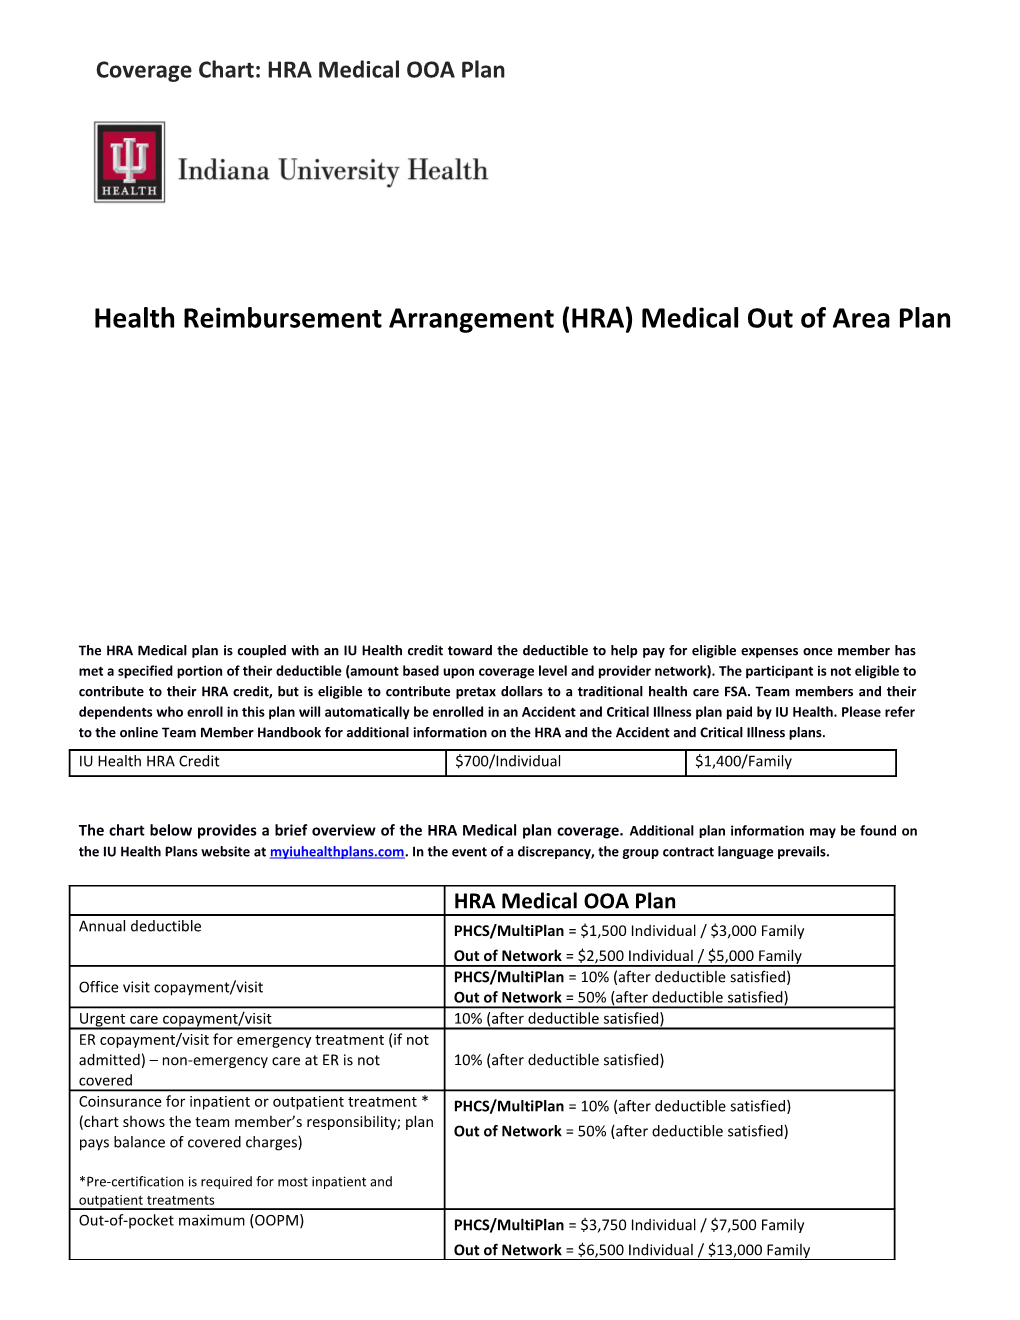 IU Health Quality Plan out of Area Coverage Chart